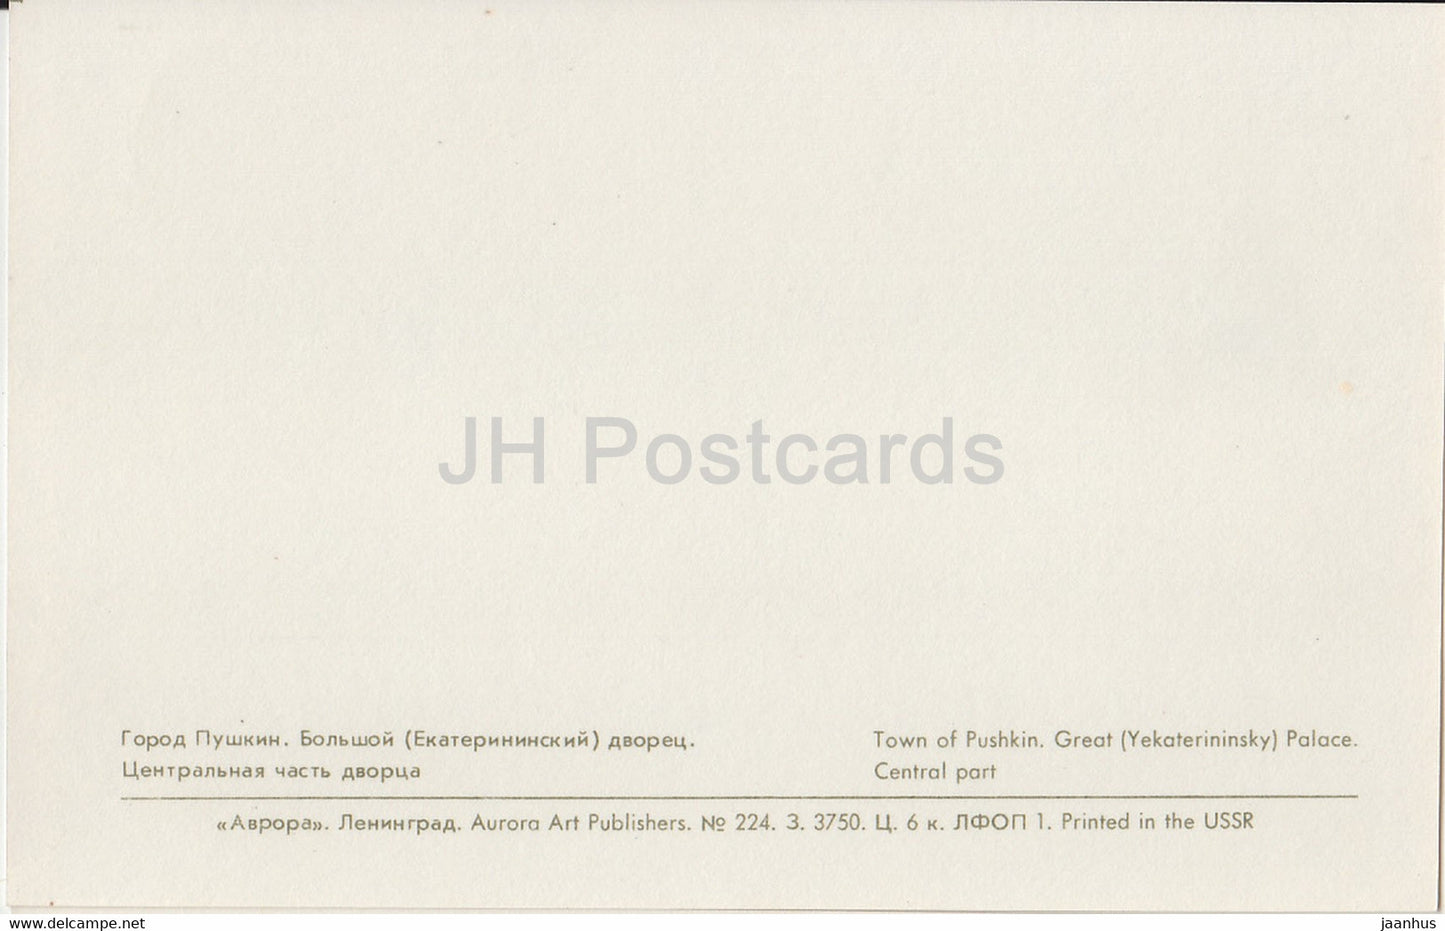 Town of Pushkin - Great (Yekaterinsky) Palace - Central Part - 1971 - Russia USSR - unused